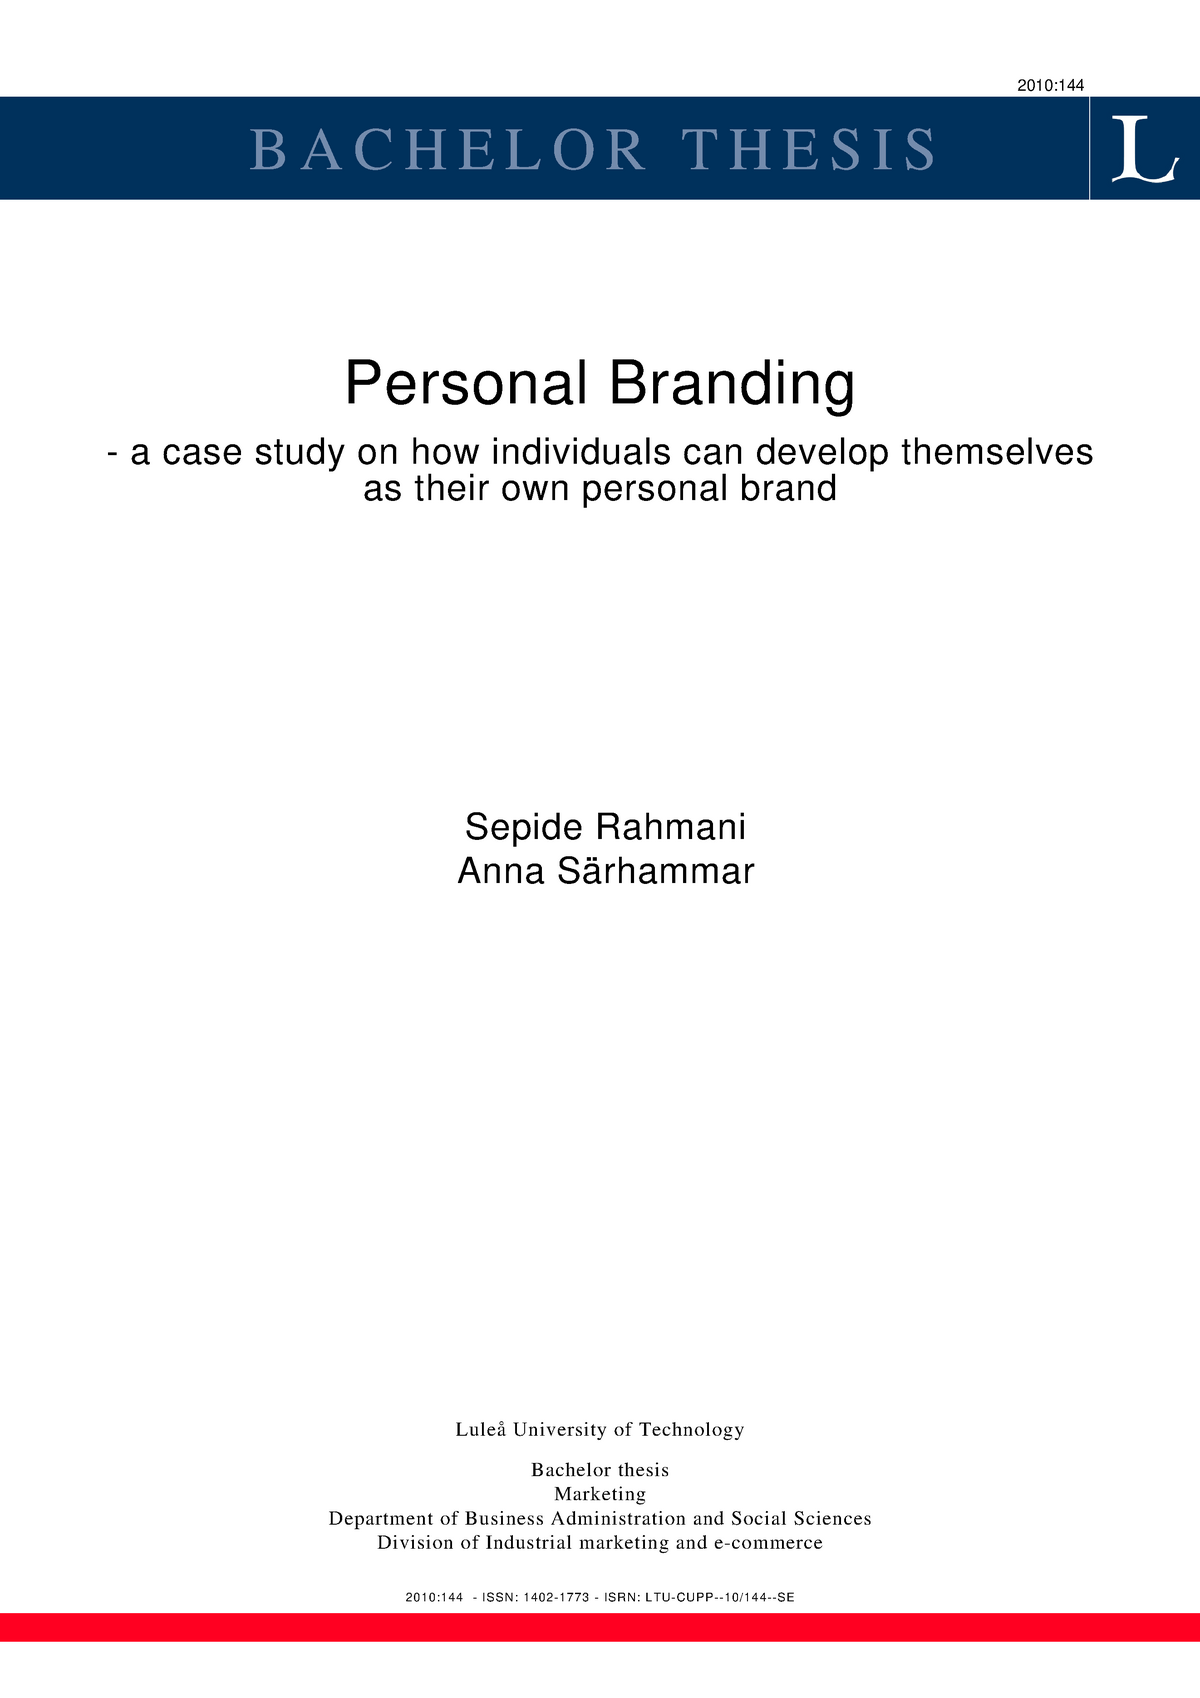 brand management master thesis